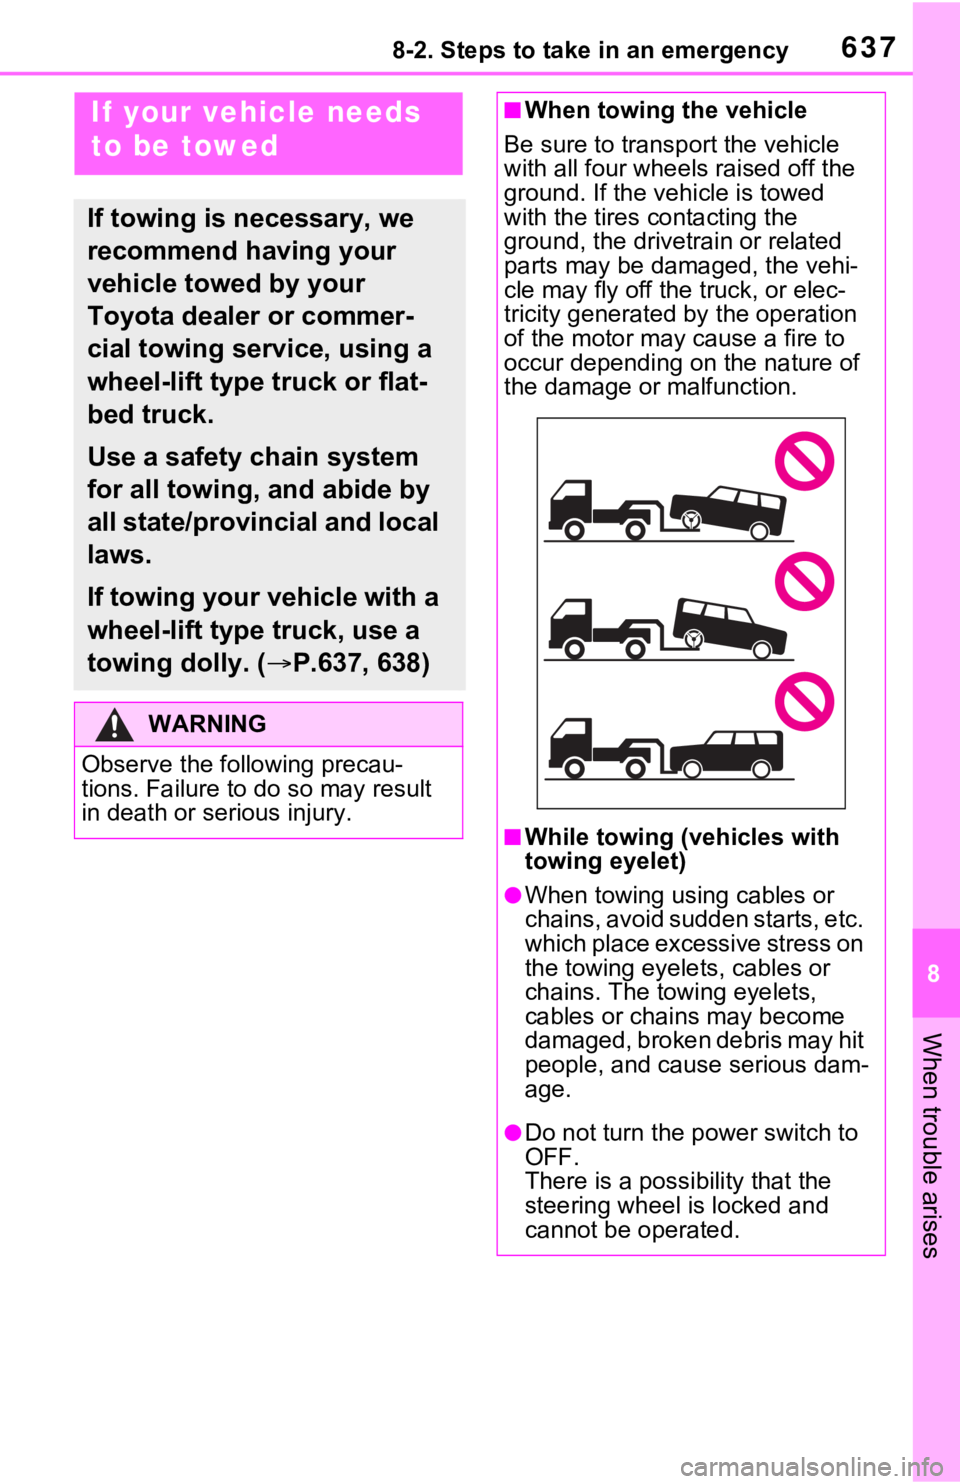 TOYOTA RAV4 HYBRID 2021  Owners Manual (in English) 6378-2. Steps to take in an emergency
8
When trouble arises
8-2.Steps to take in an emergency
If your vehicle needs 
to be towed
If towing is necessary, we 
recommend having your 
vehicle towed by you